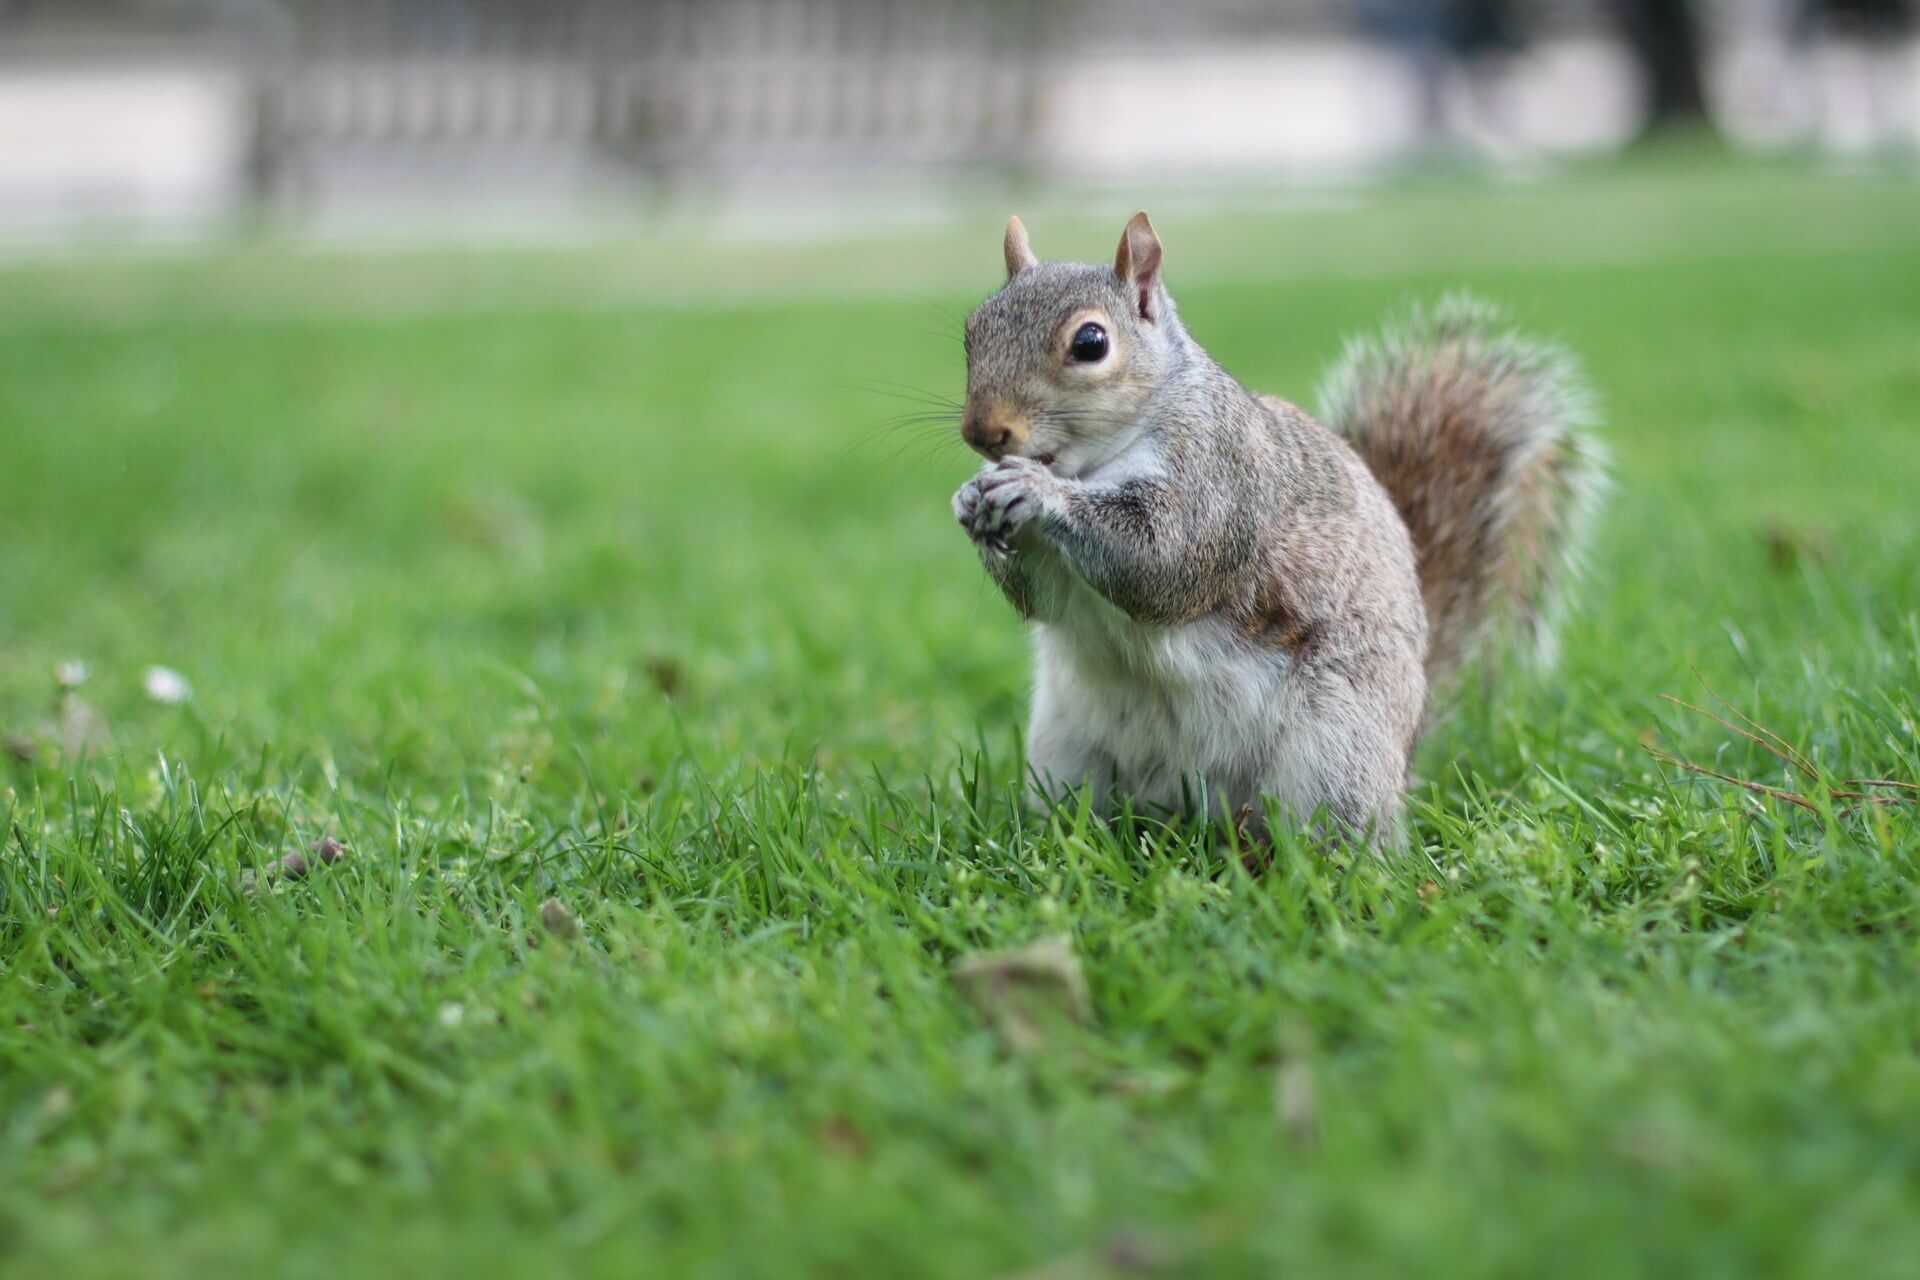 Close up of squirrel eating on lawn